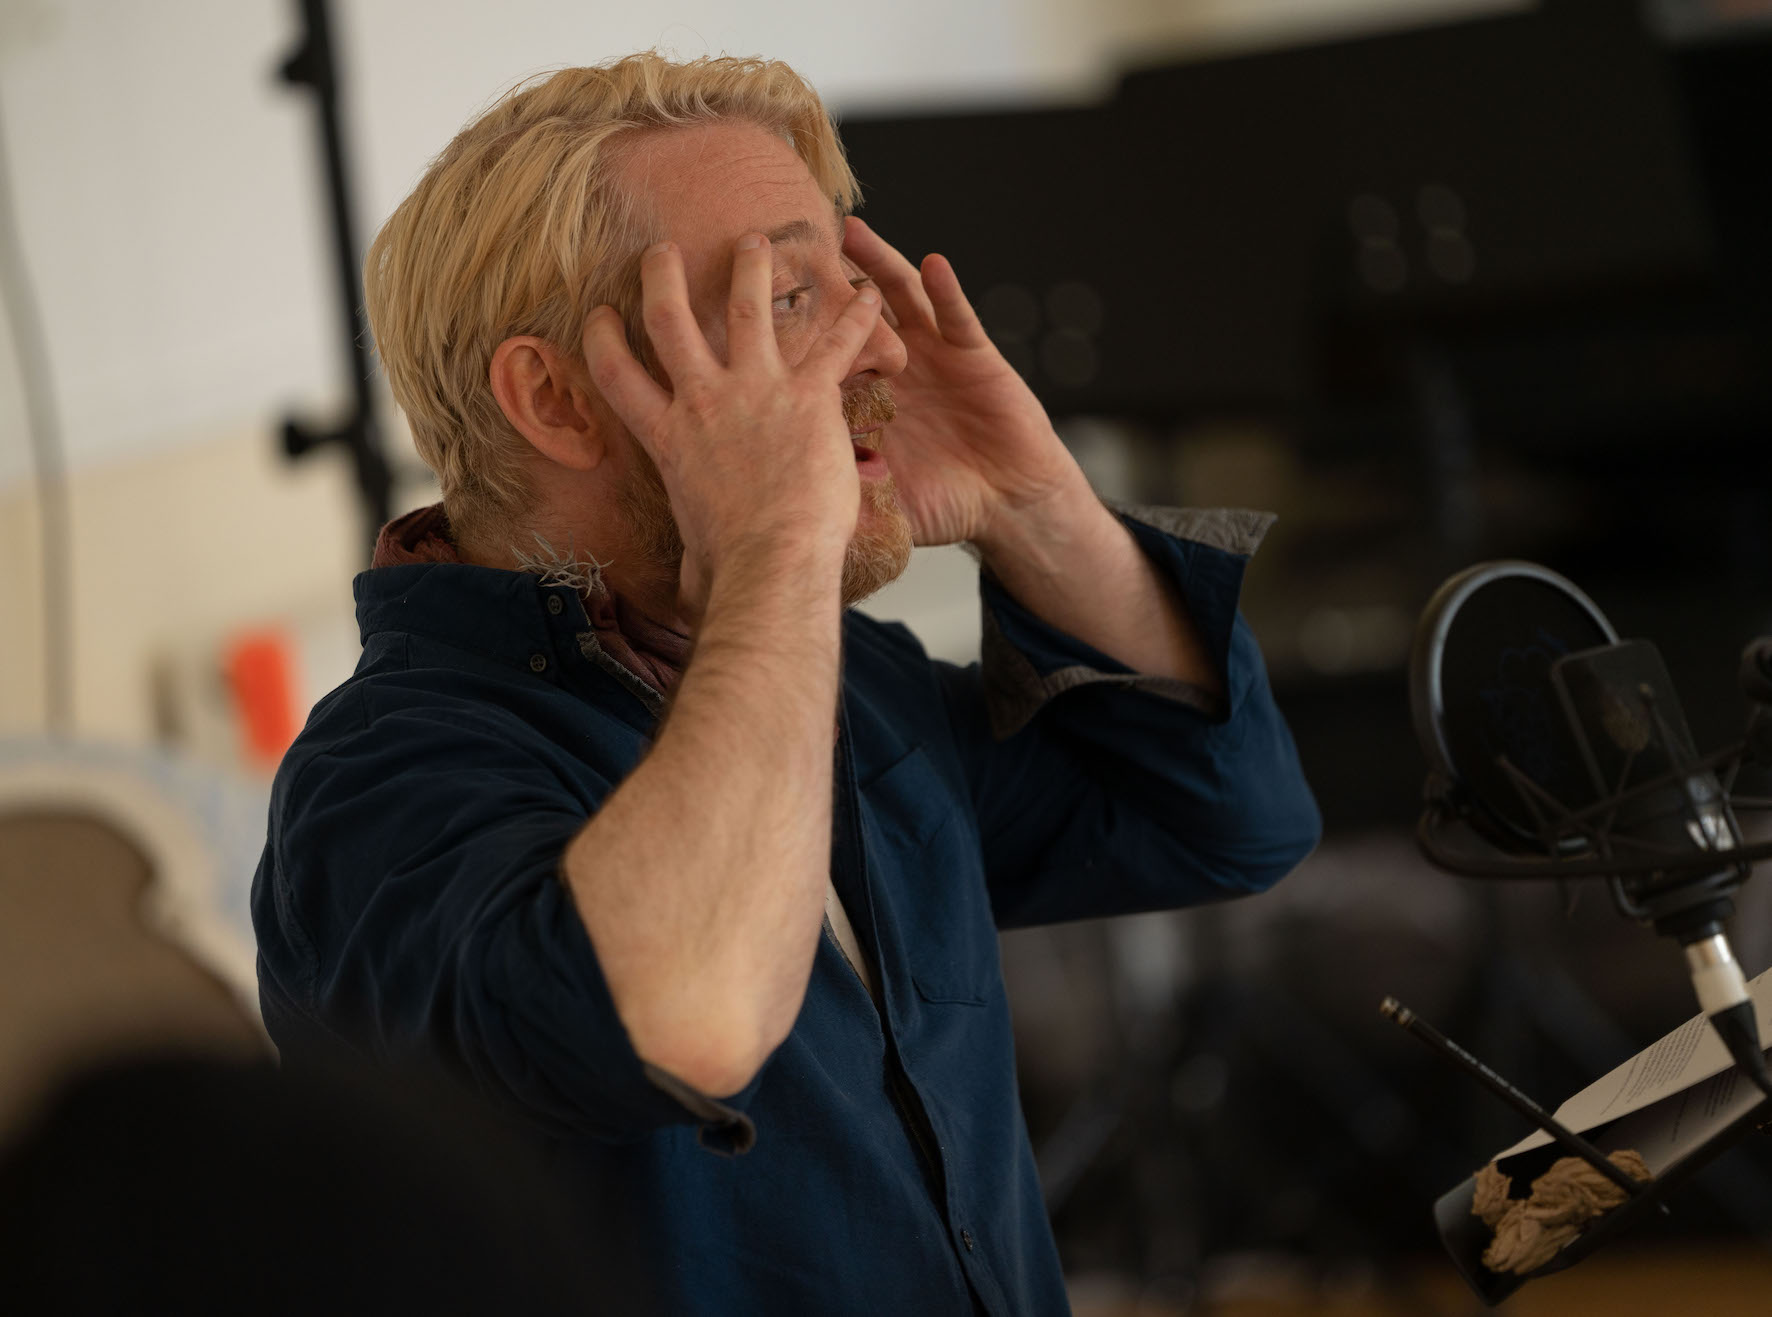 An actor holds their hands up to their face, performing being shocked